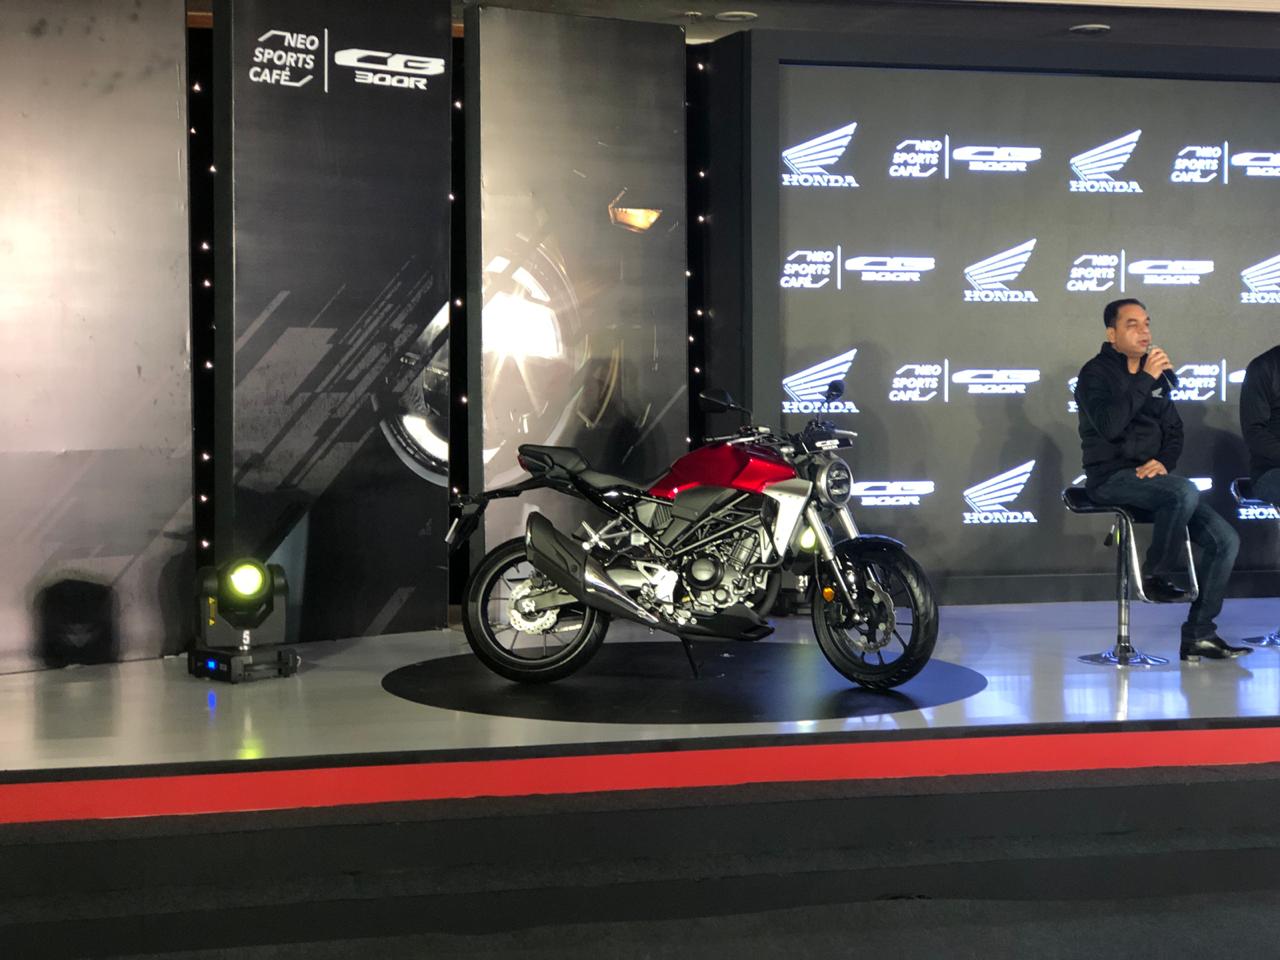 <p>And finally! The 2019 Honda CB300R has been launched in India at Rs 2.41 lakh, ex-showroom pan-India. Bookings open across dealerships. <a href="http://overdrive.in/news-cars-auto/2019-honda-cb300r-launched-in-india-at-rs-2-41-lakh/">Details here</a></p>